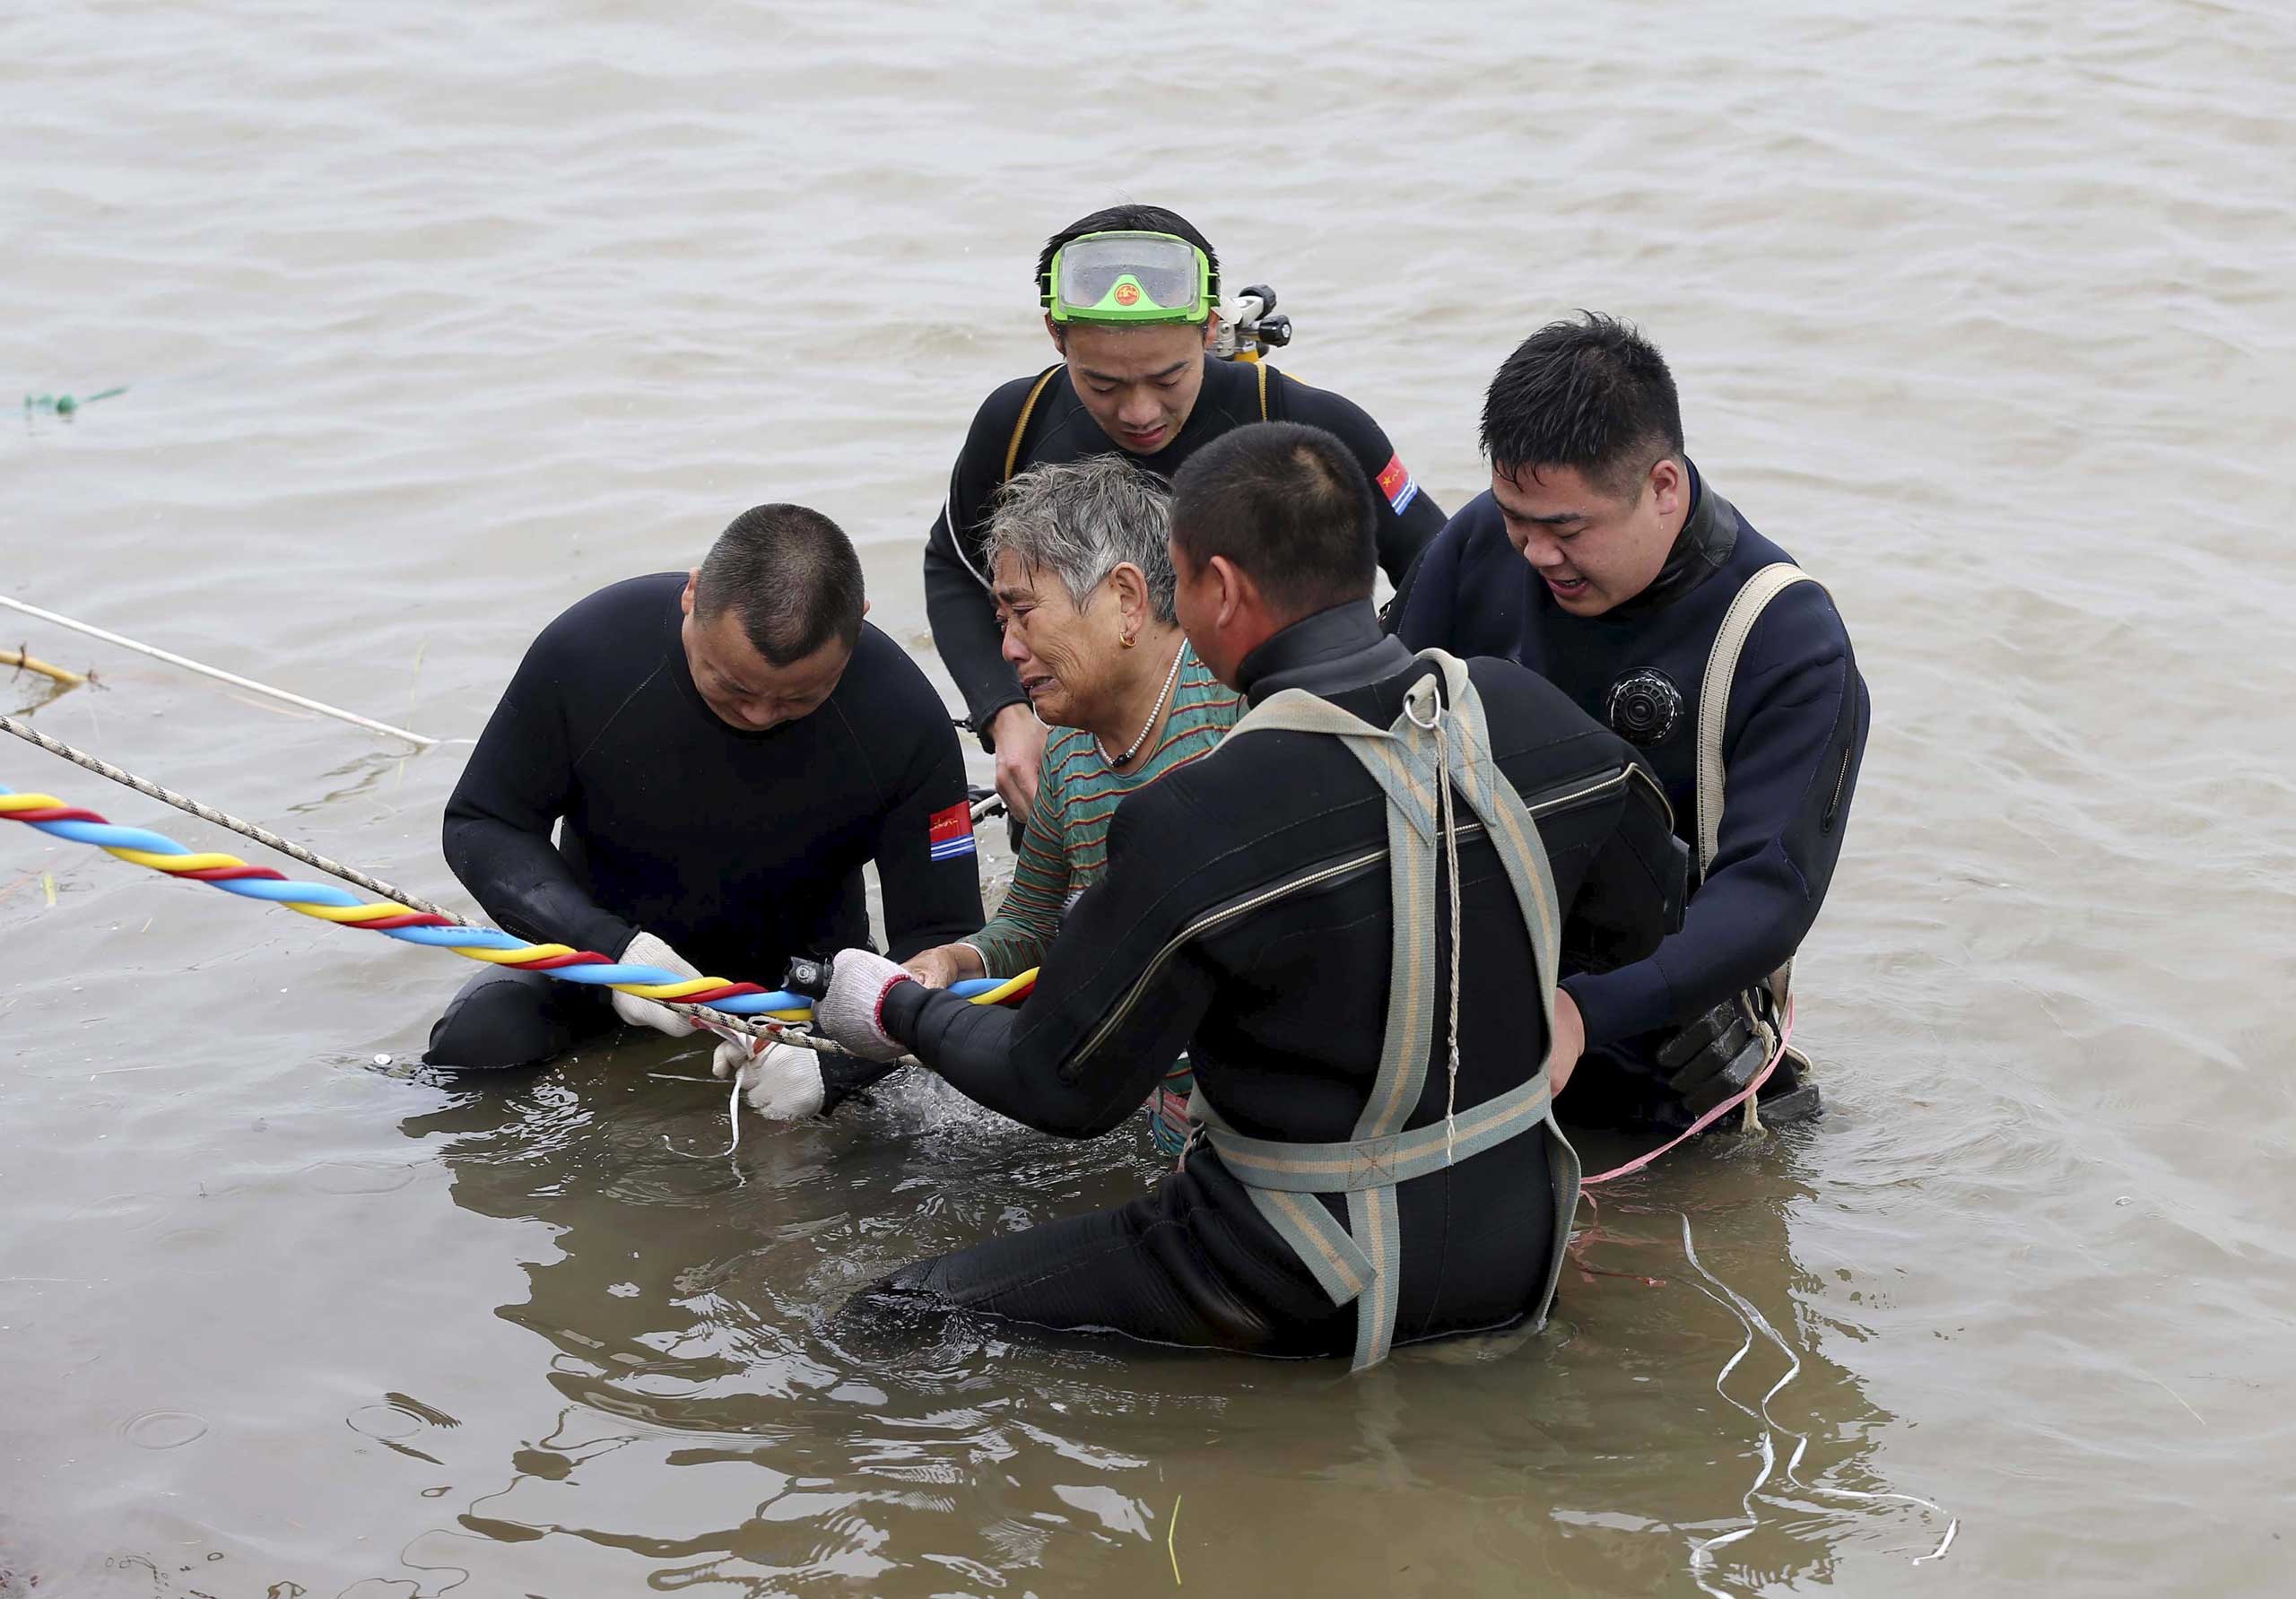 A woman is helped after being pulled out by divers from a sunken ship in Jianli, Hubei province, China on June 2, 2015.